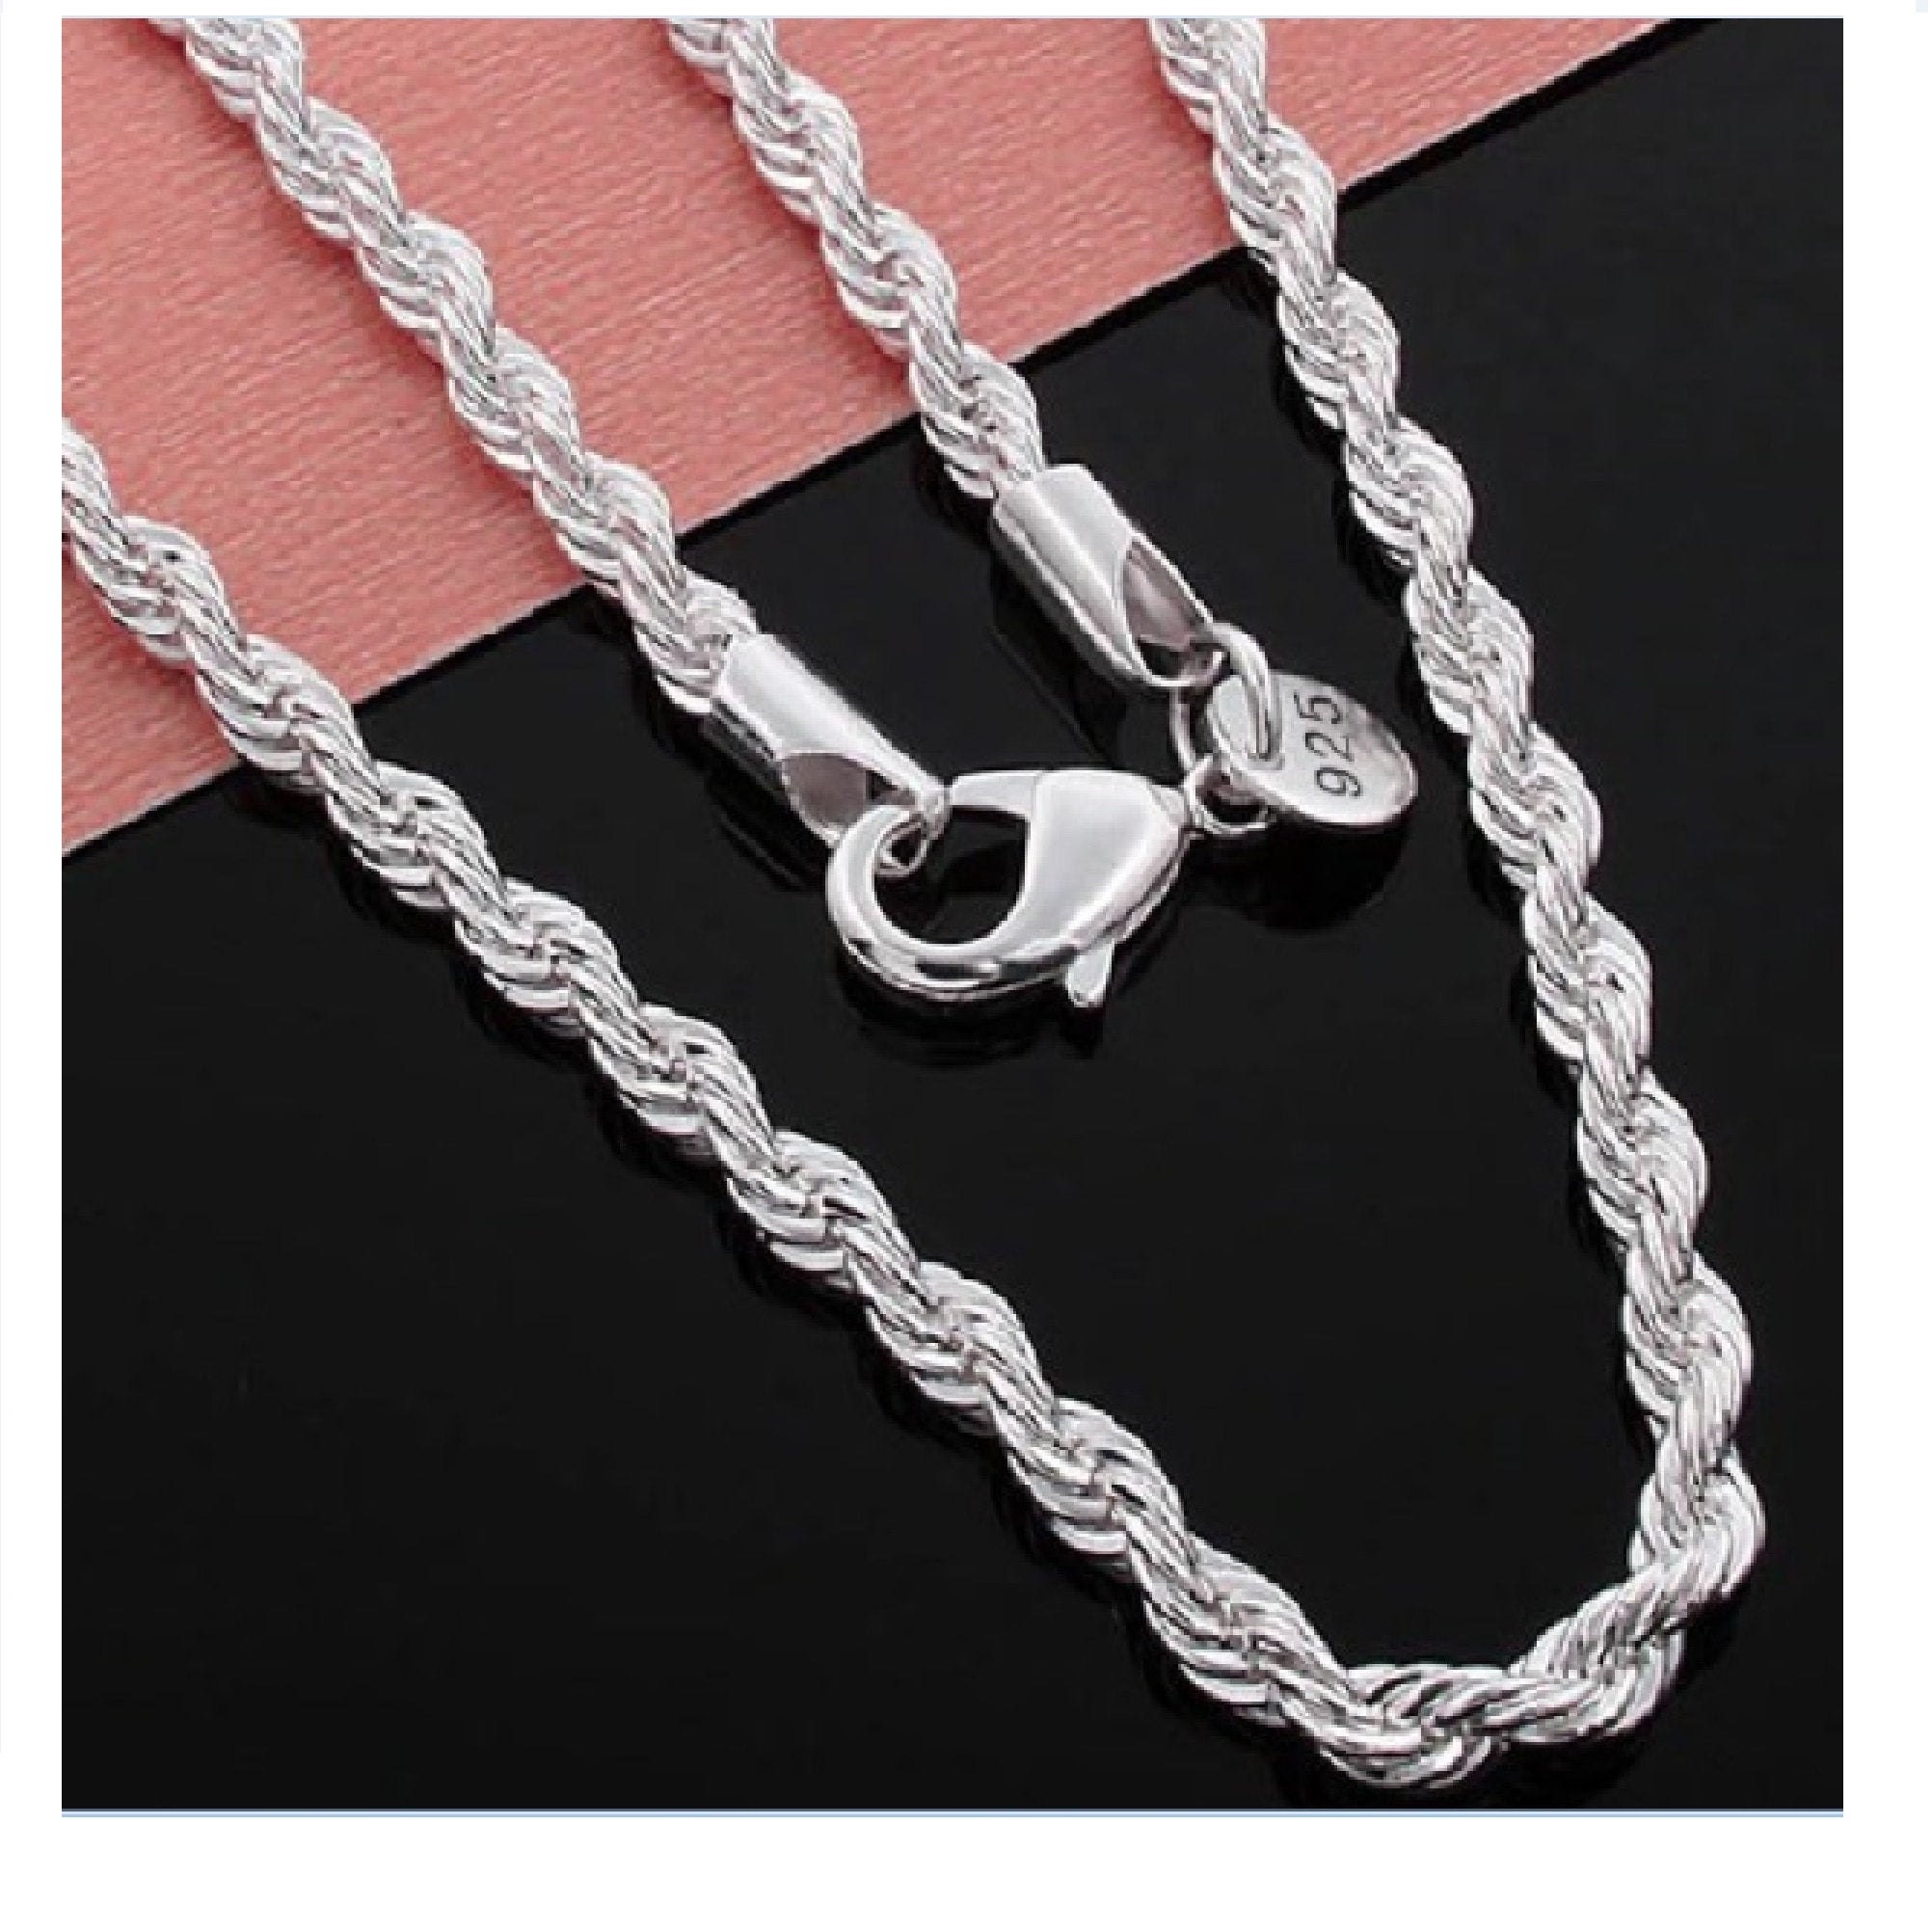 Sterling Silver Chains - Box, Snake, Bead, Rope - 70% Off